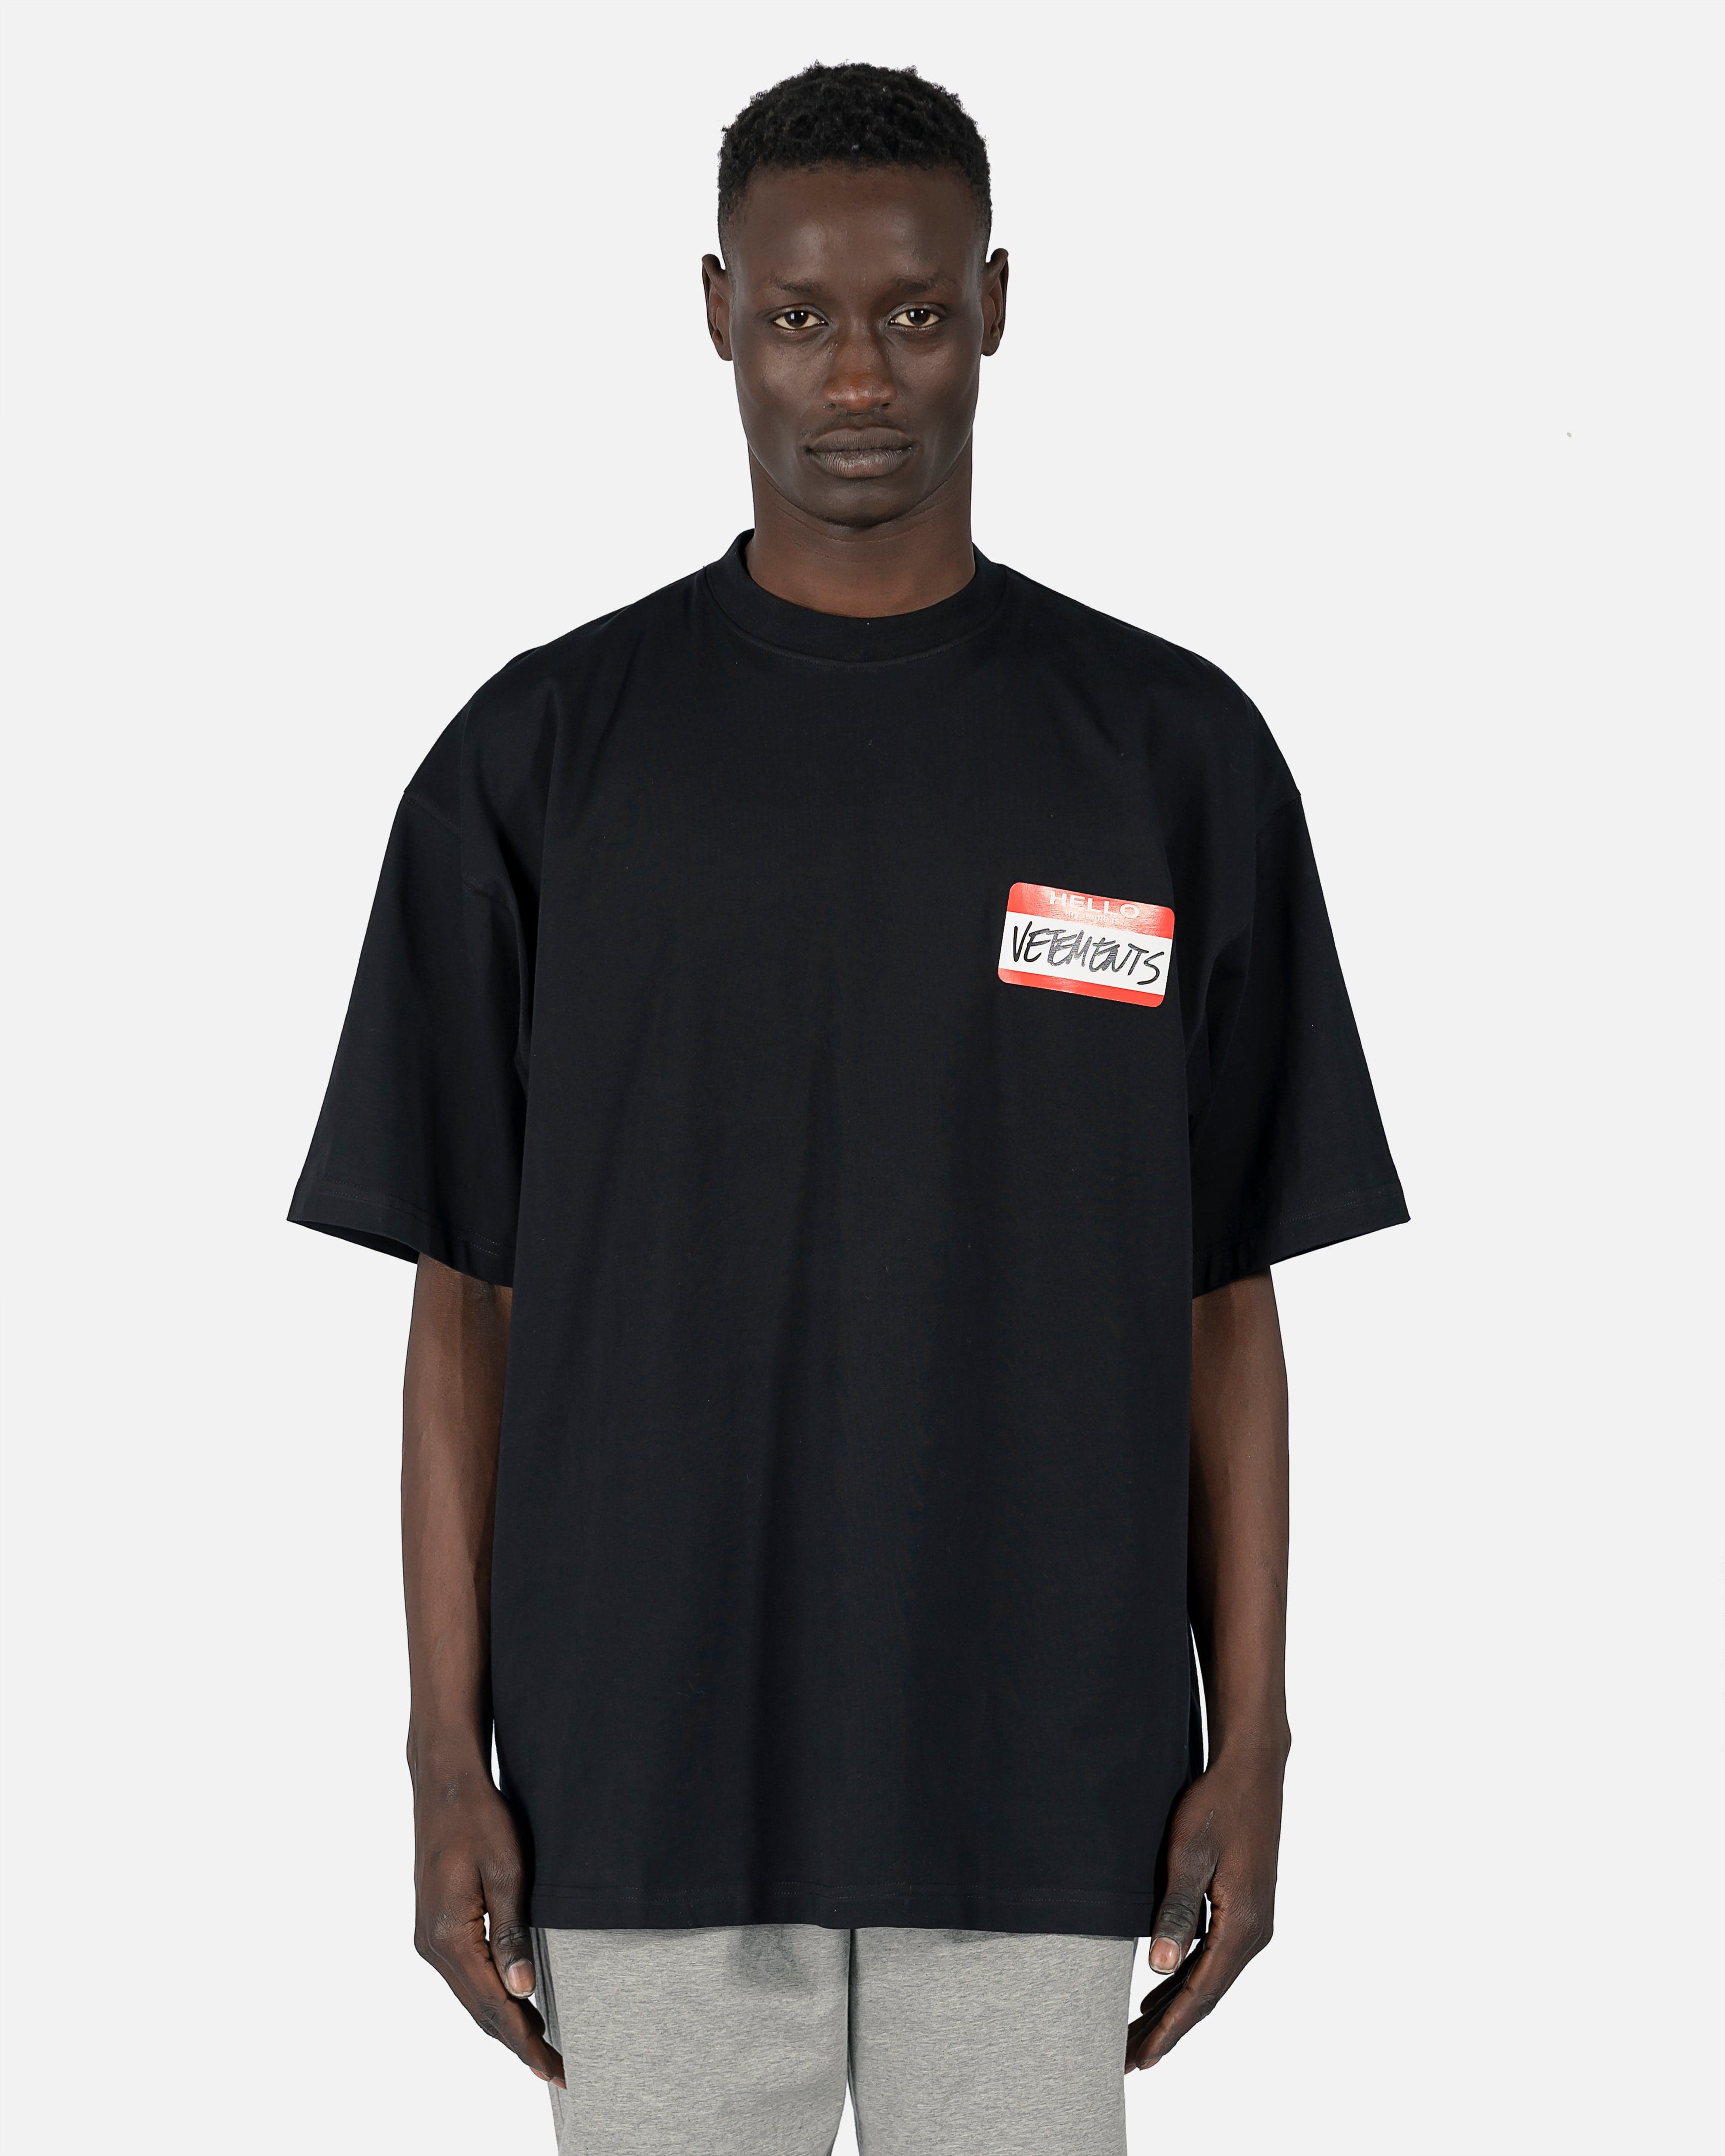 My Name is VETEMENTS T-Shirt in Black